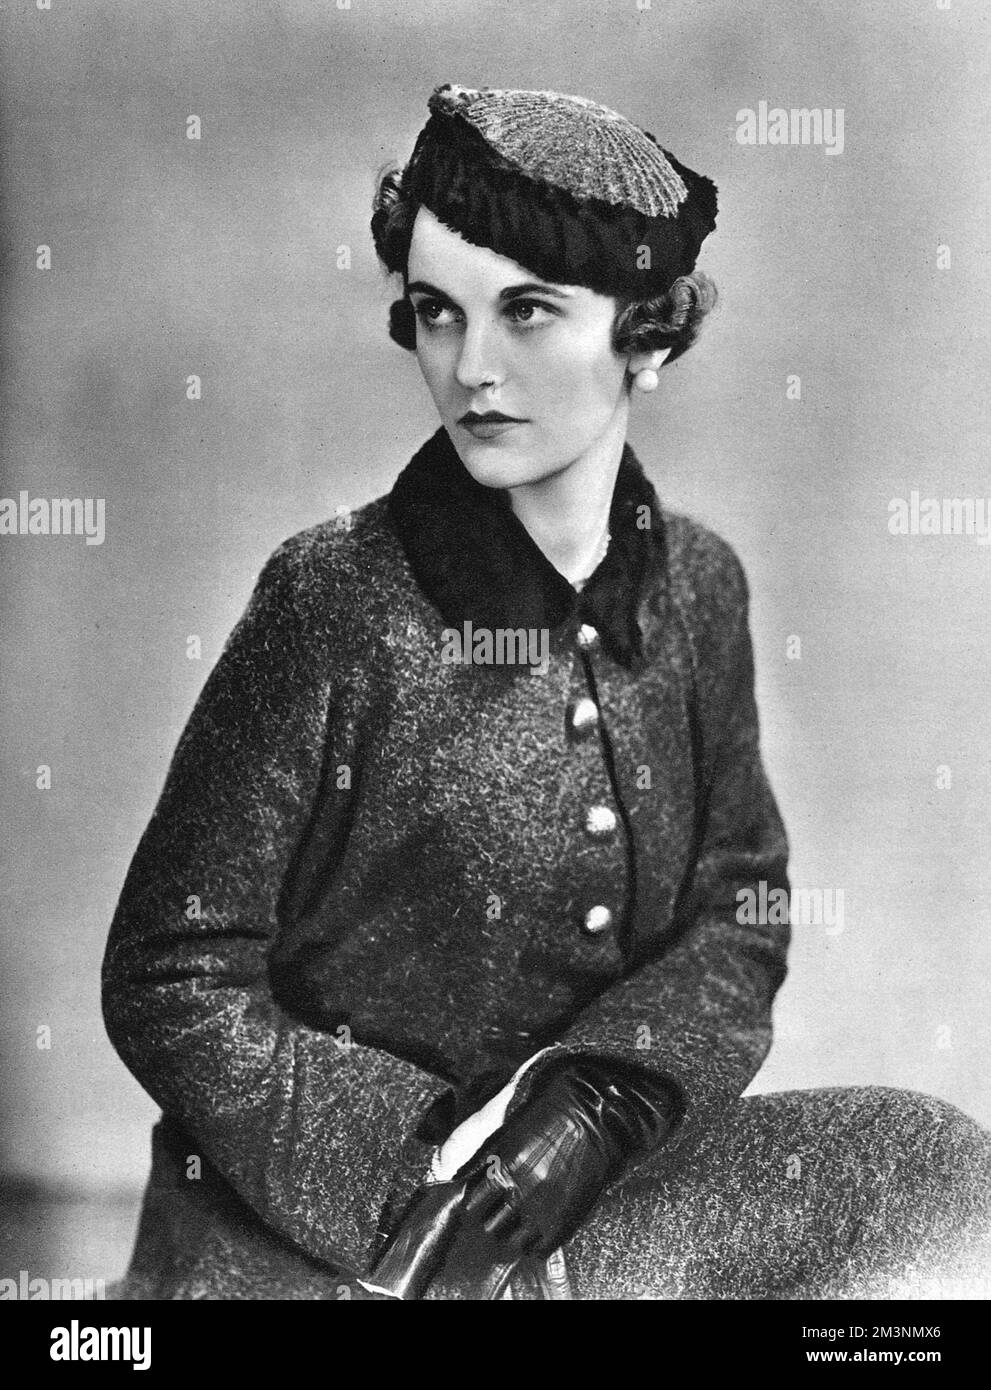 Margaret Whigham (1912 - 1993), British society figure, debutante of the year in 1930. Later Mrs Charles Sweeny, after marrying the American golfer, and then Duchess of Argyll, whose scandalous divorce case, involving the photographs of the 'headless' man plunged her into disgrace and penury. Featured in an exhibition by photographer Peter North called Significant Portraits featuring all the noted society beauties of 1934.     Date: 1934 Stock Photo